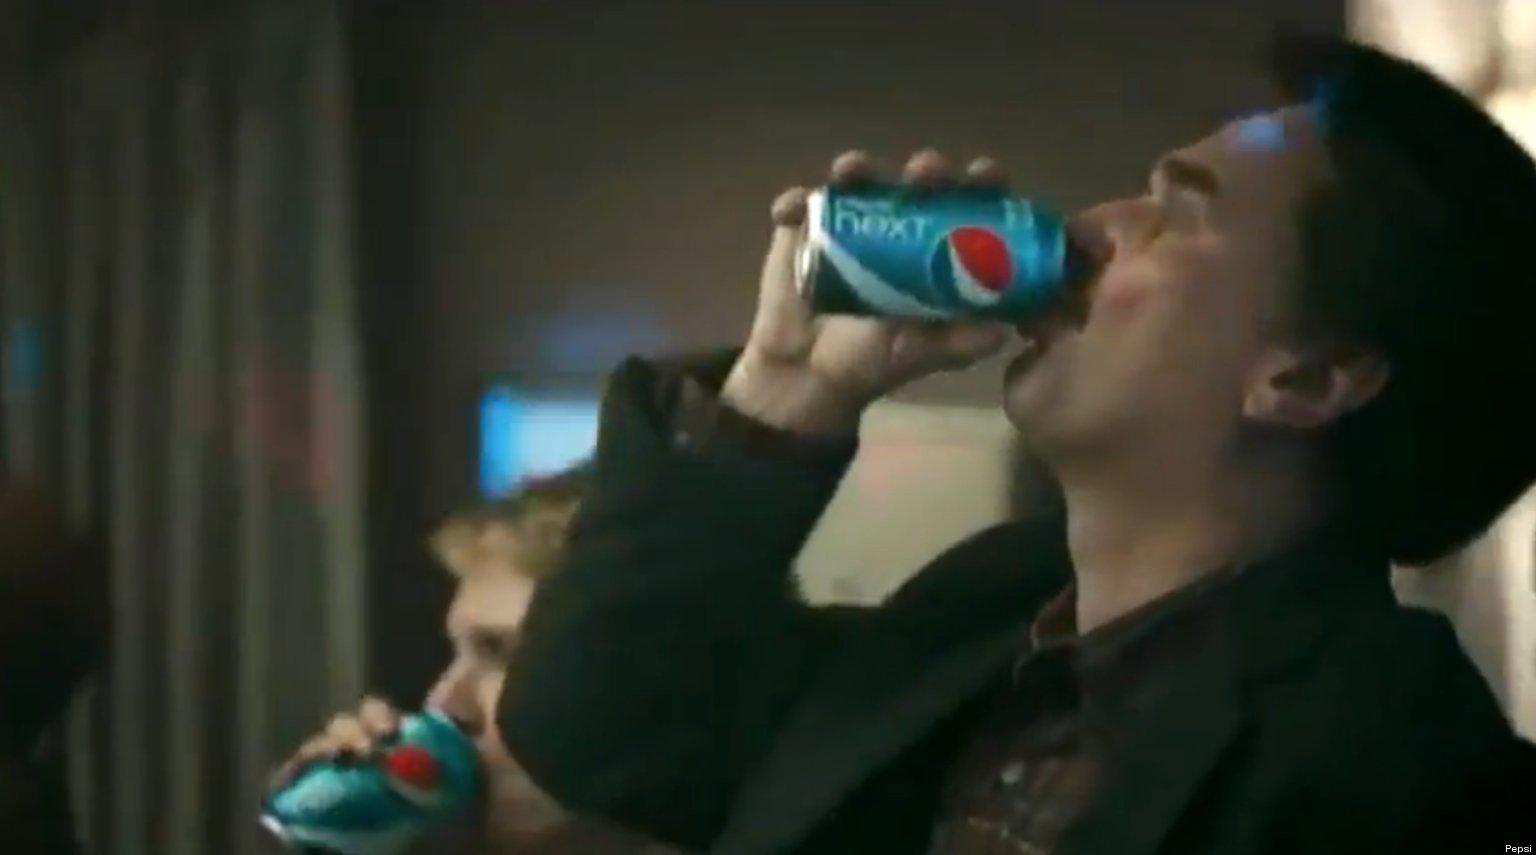 pepsi-party-super-bowl-commercial-does-dad-in-ad-look-familiar